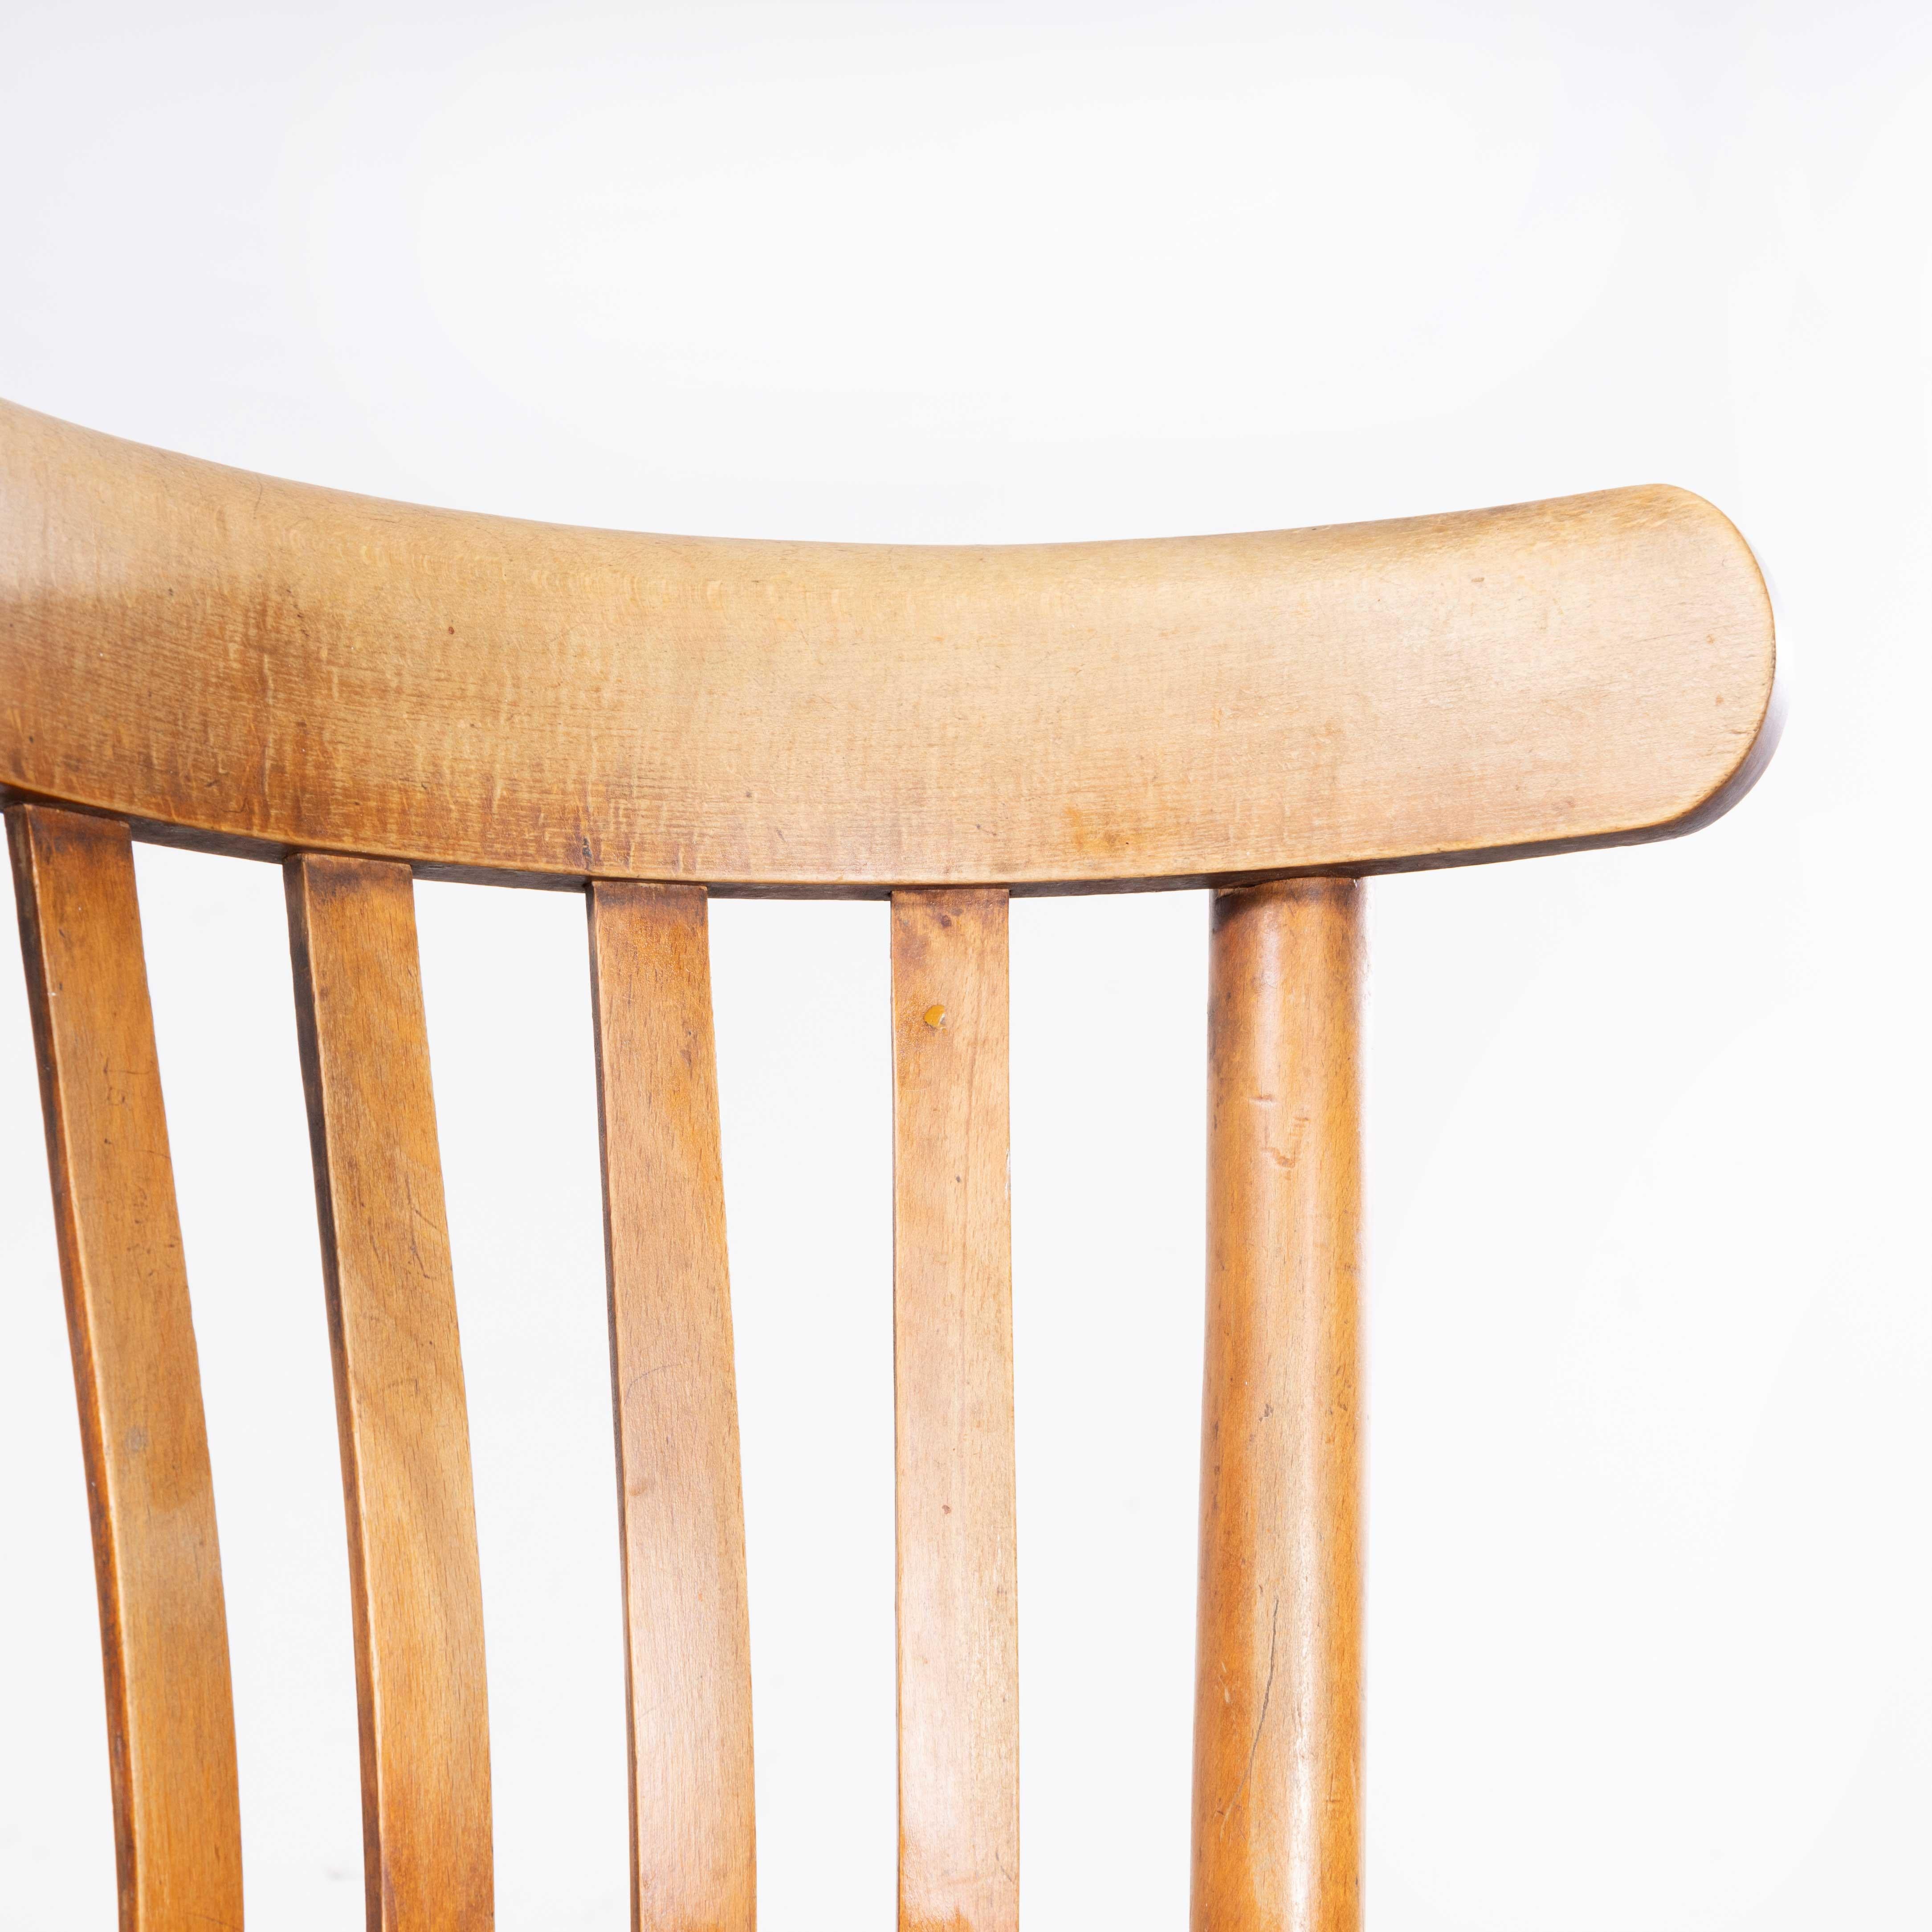 1950’s French Luterma Bleached Bentwood Chairs – Set of Four
1950’s French Luterma Bleached Bentwood Chairs – Set of Four. The process of steam bending beech to create elegant chairs was discovered and developed by Thonet, but when its patents